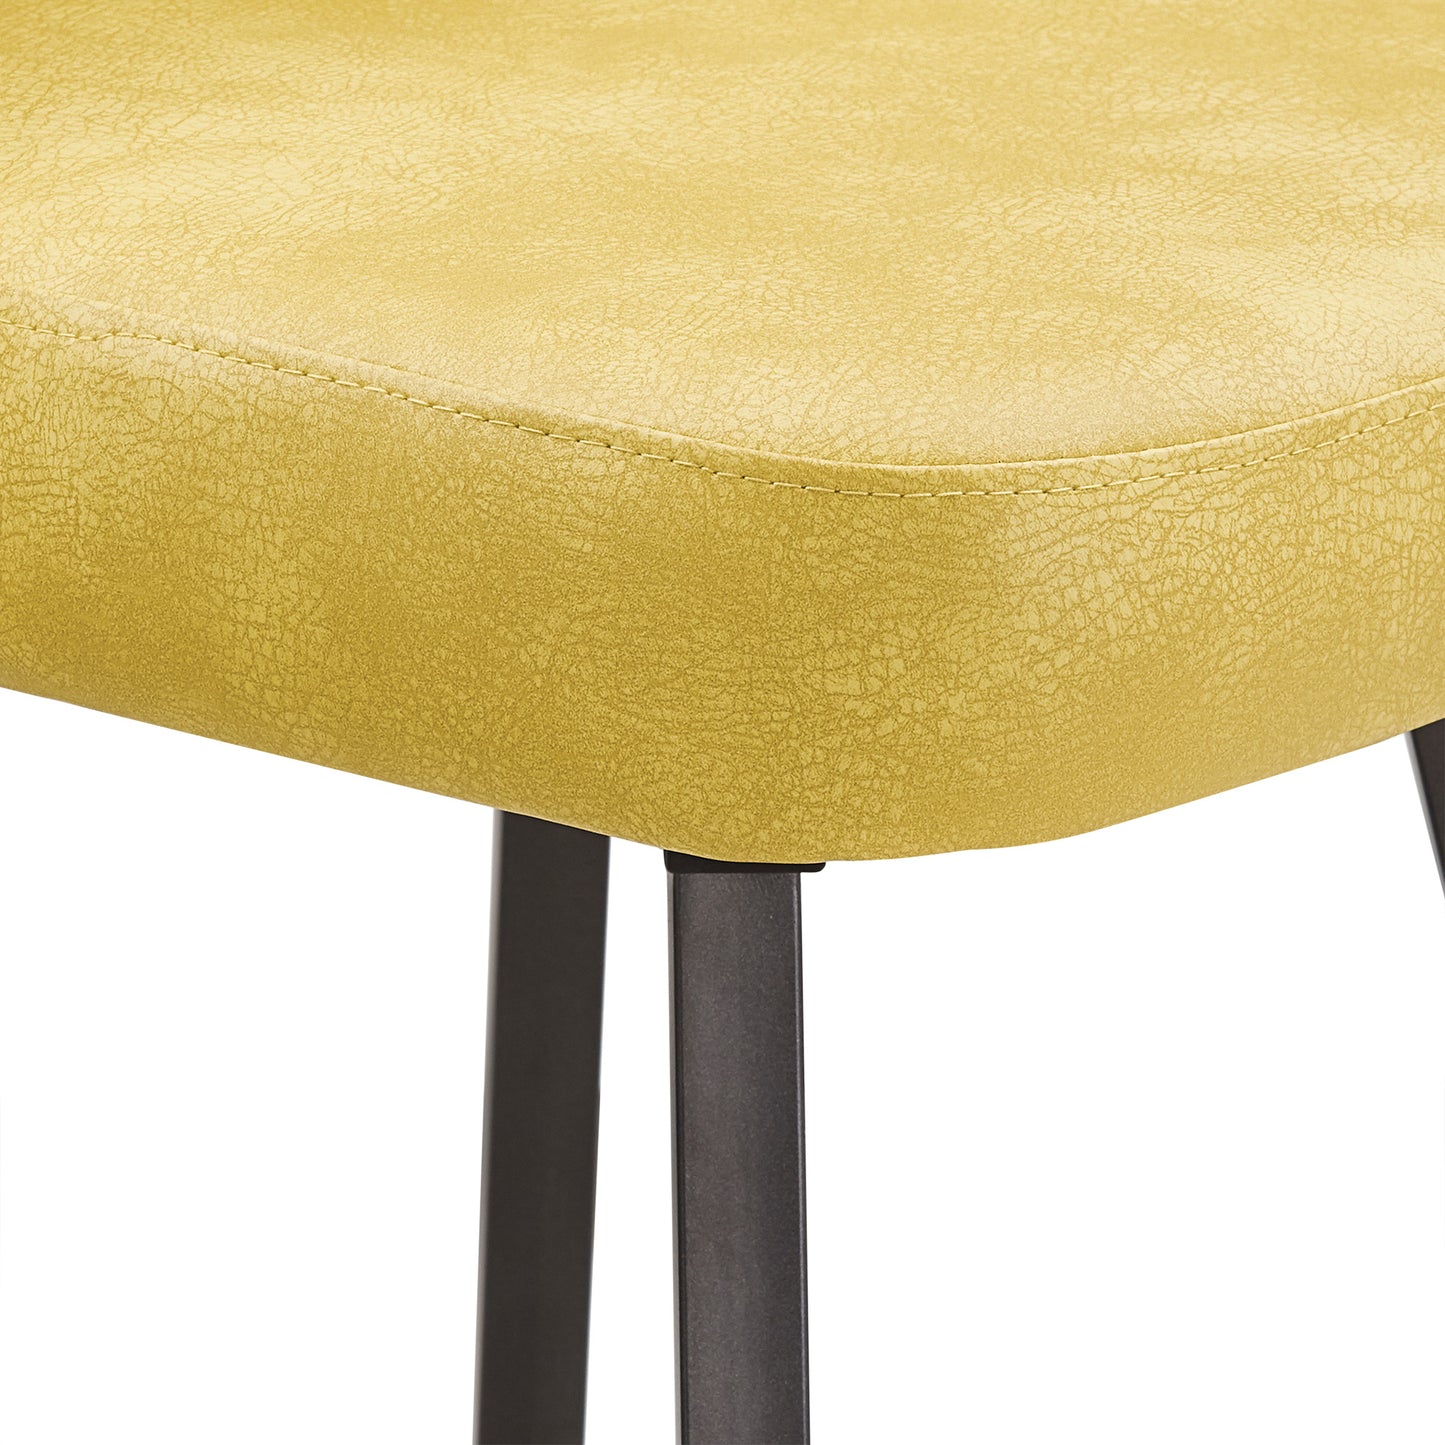 Metal Swivel Stools (Set of 2) - Yellow PU Leather, 24" Counter Height